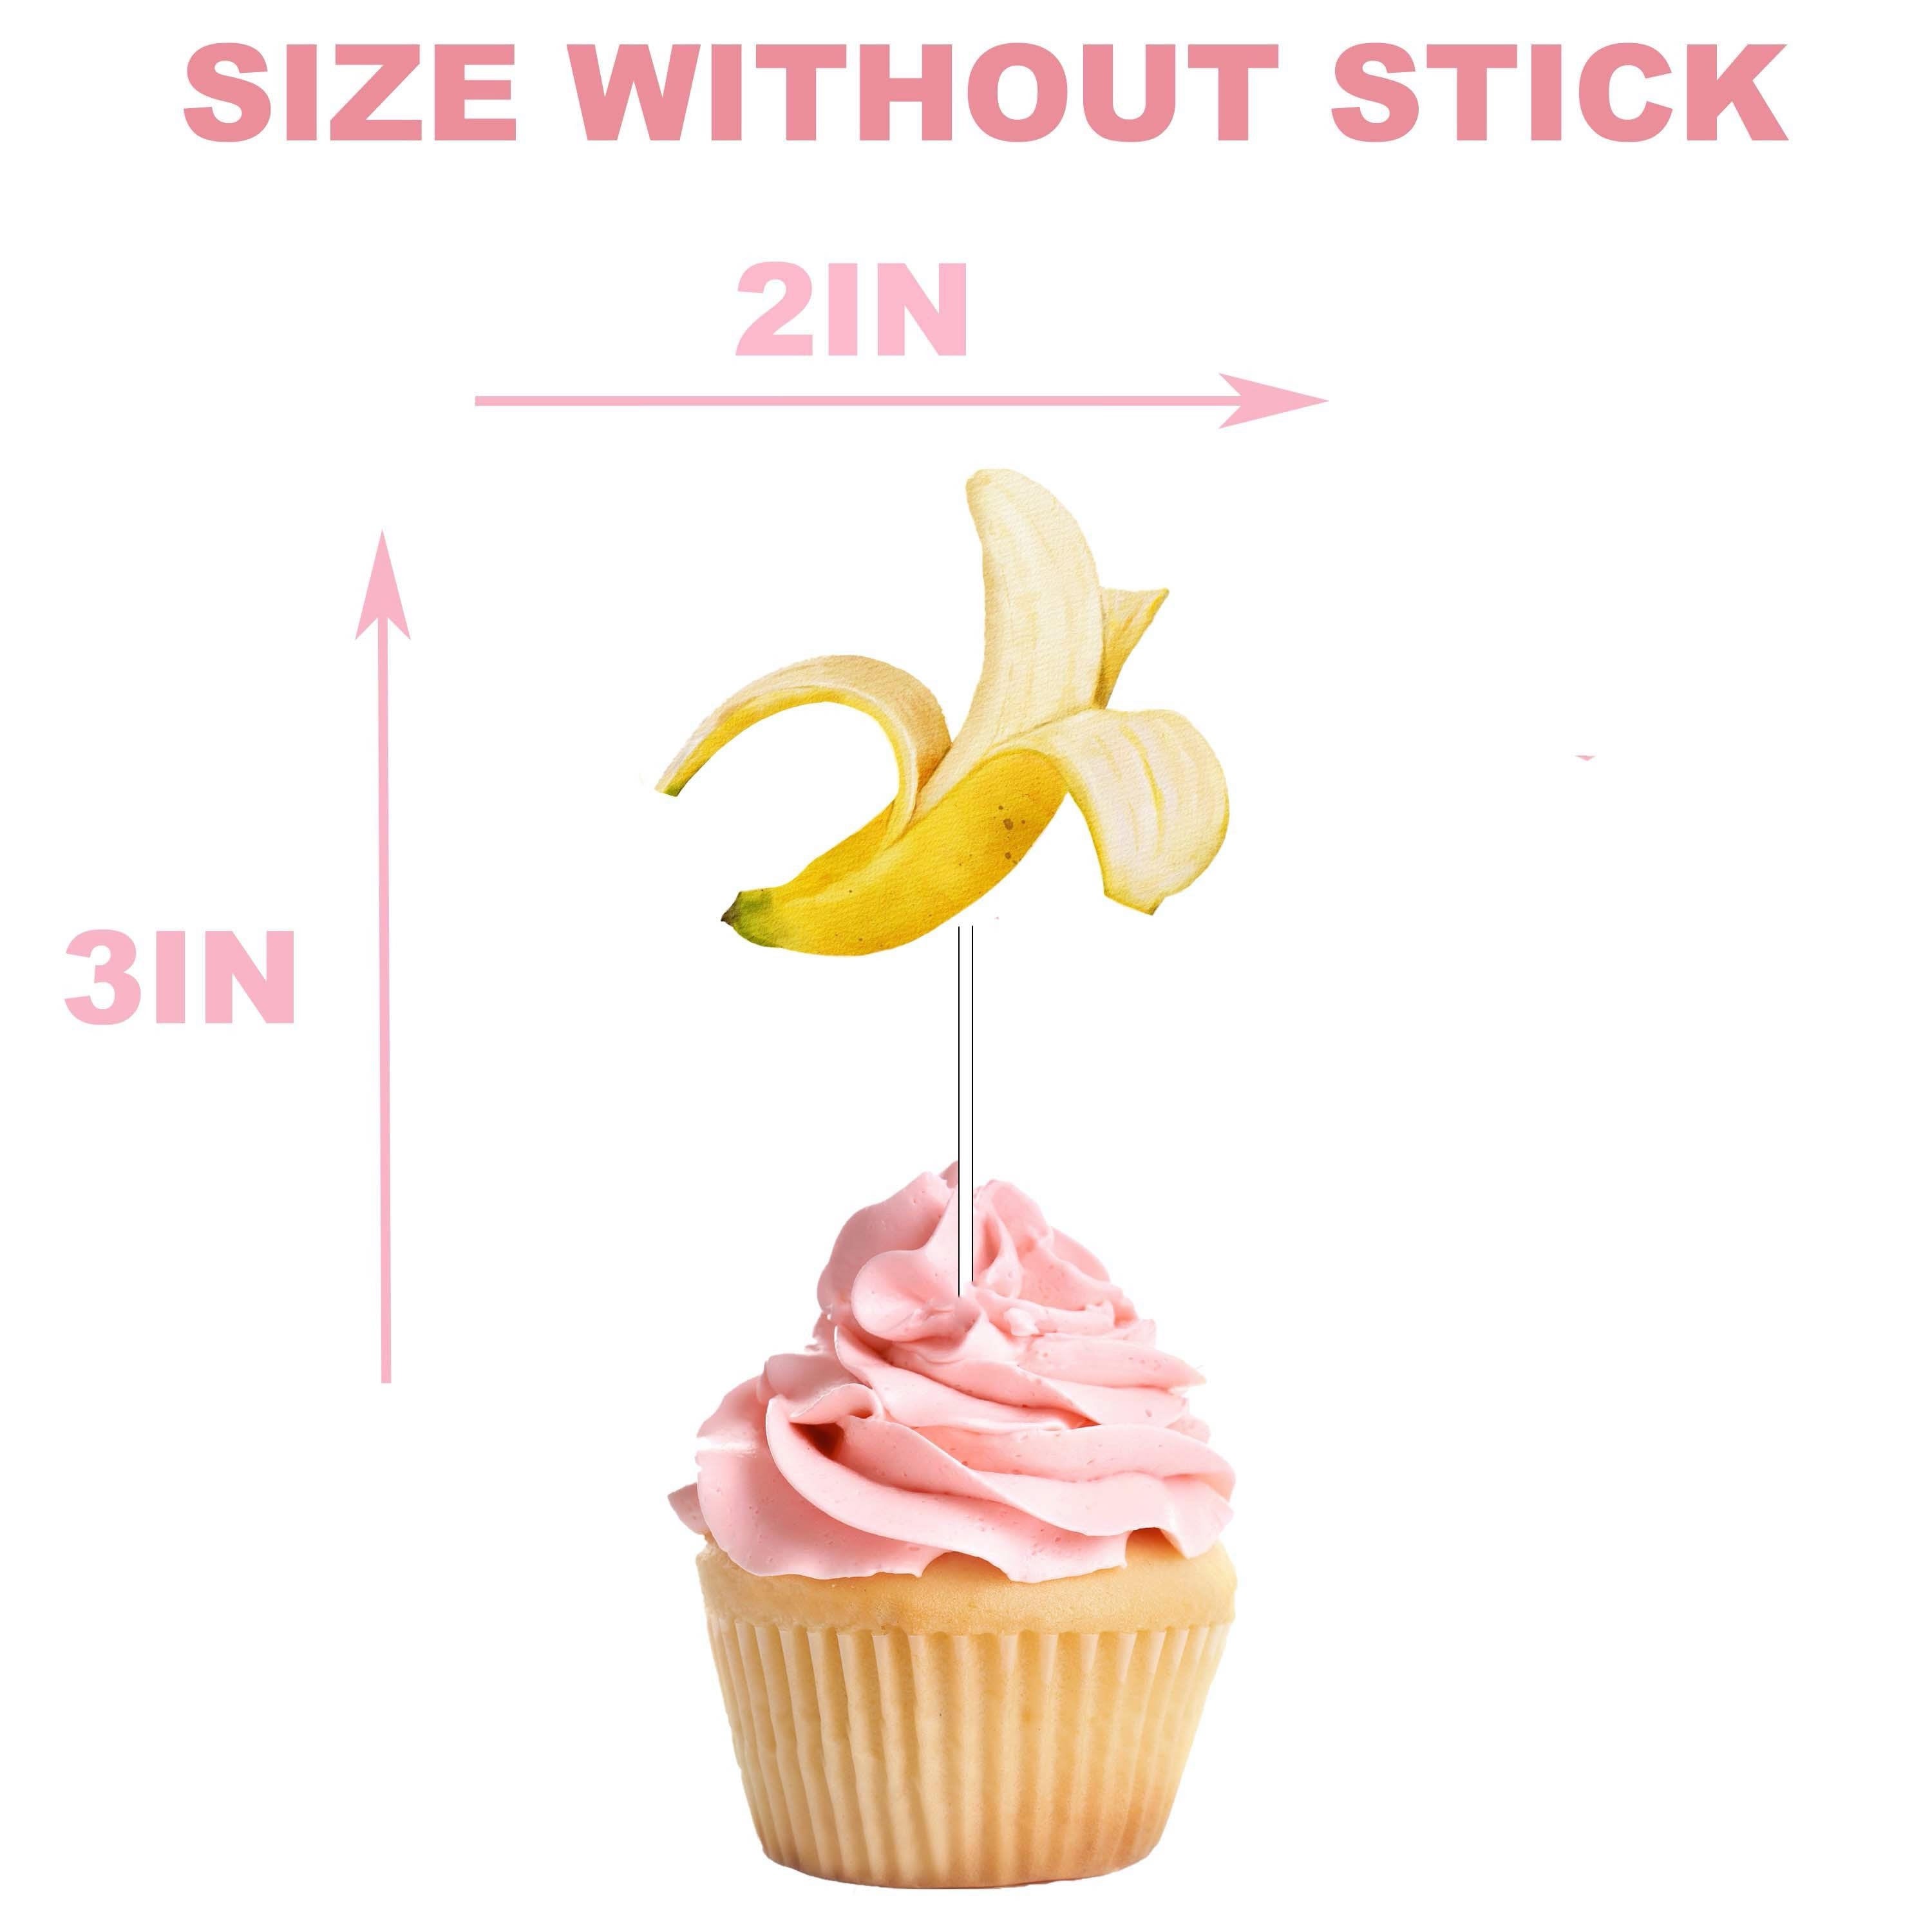 Banana Cupcake Toppers - Add a Bunch of Fun to Your Party Treats!